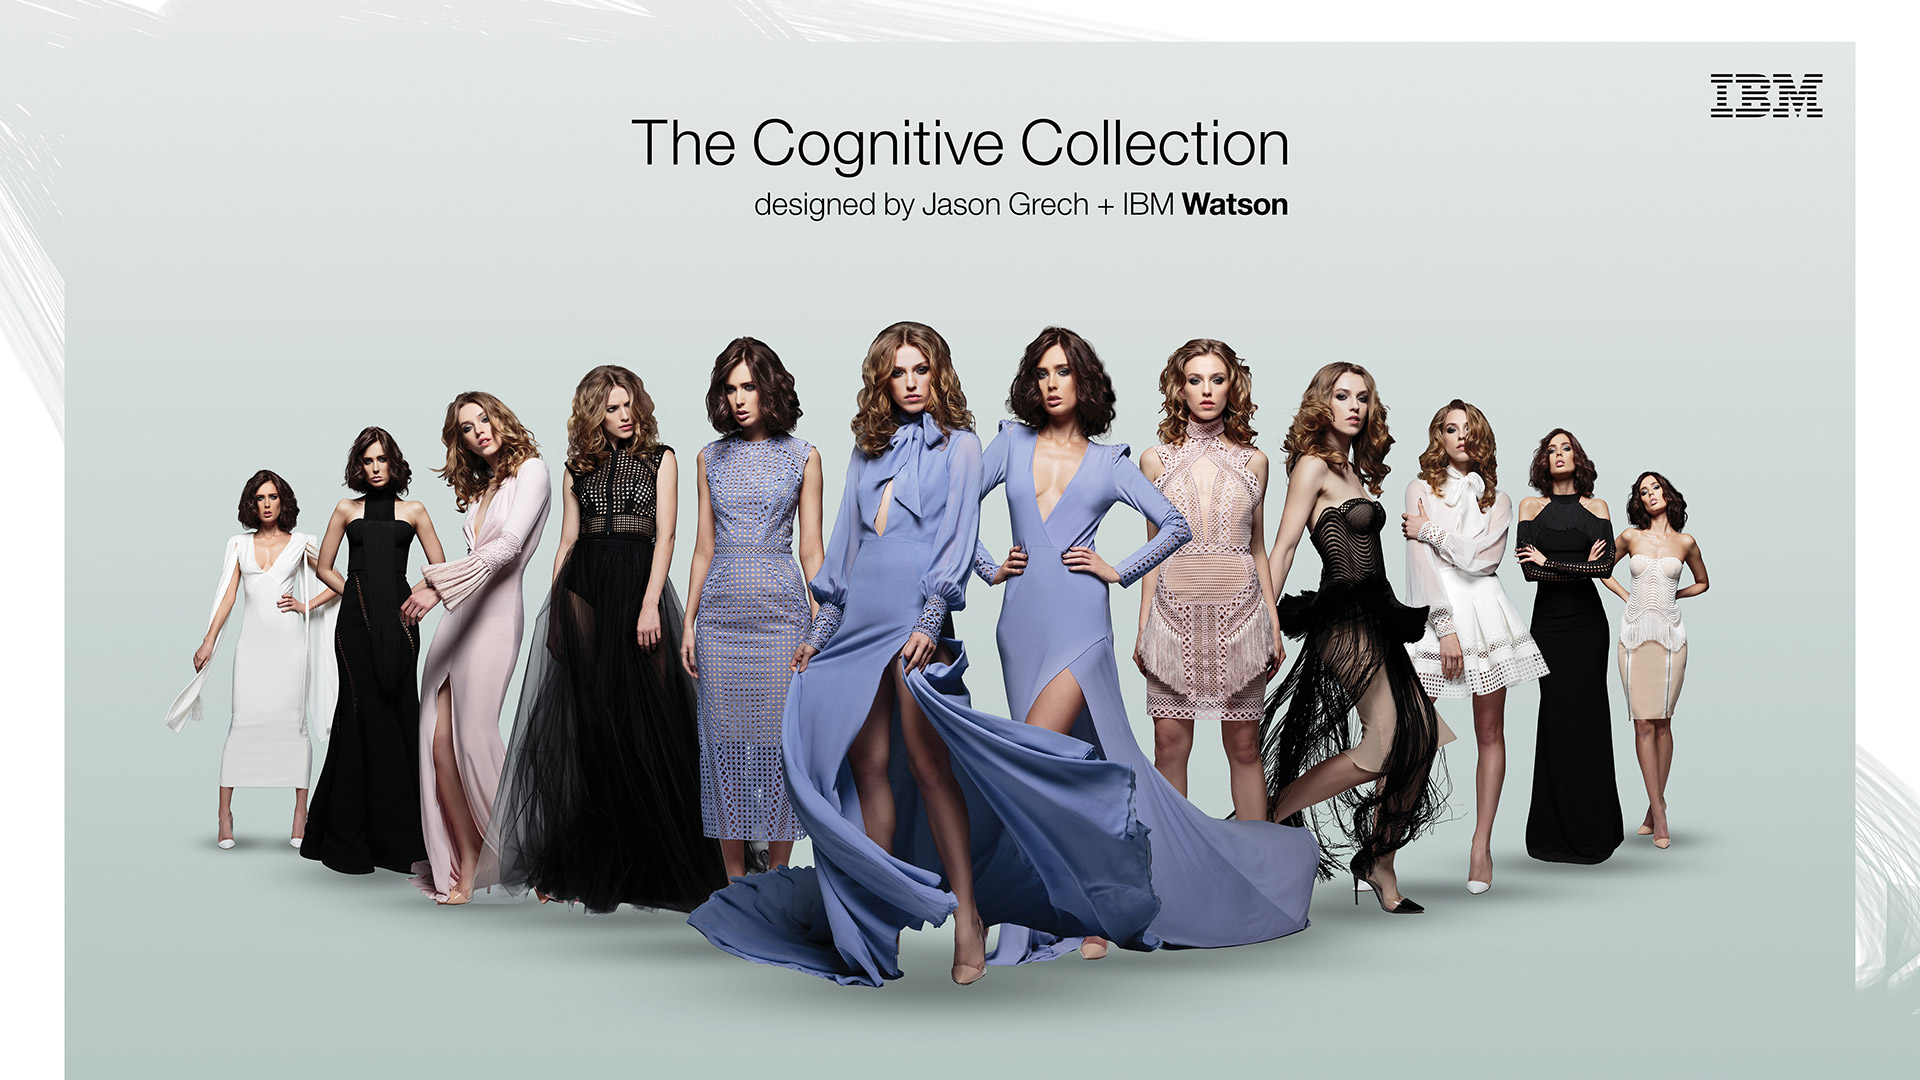 The Cognitive Collection designed by Jason Grech + IBM Watson